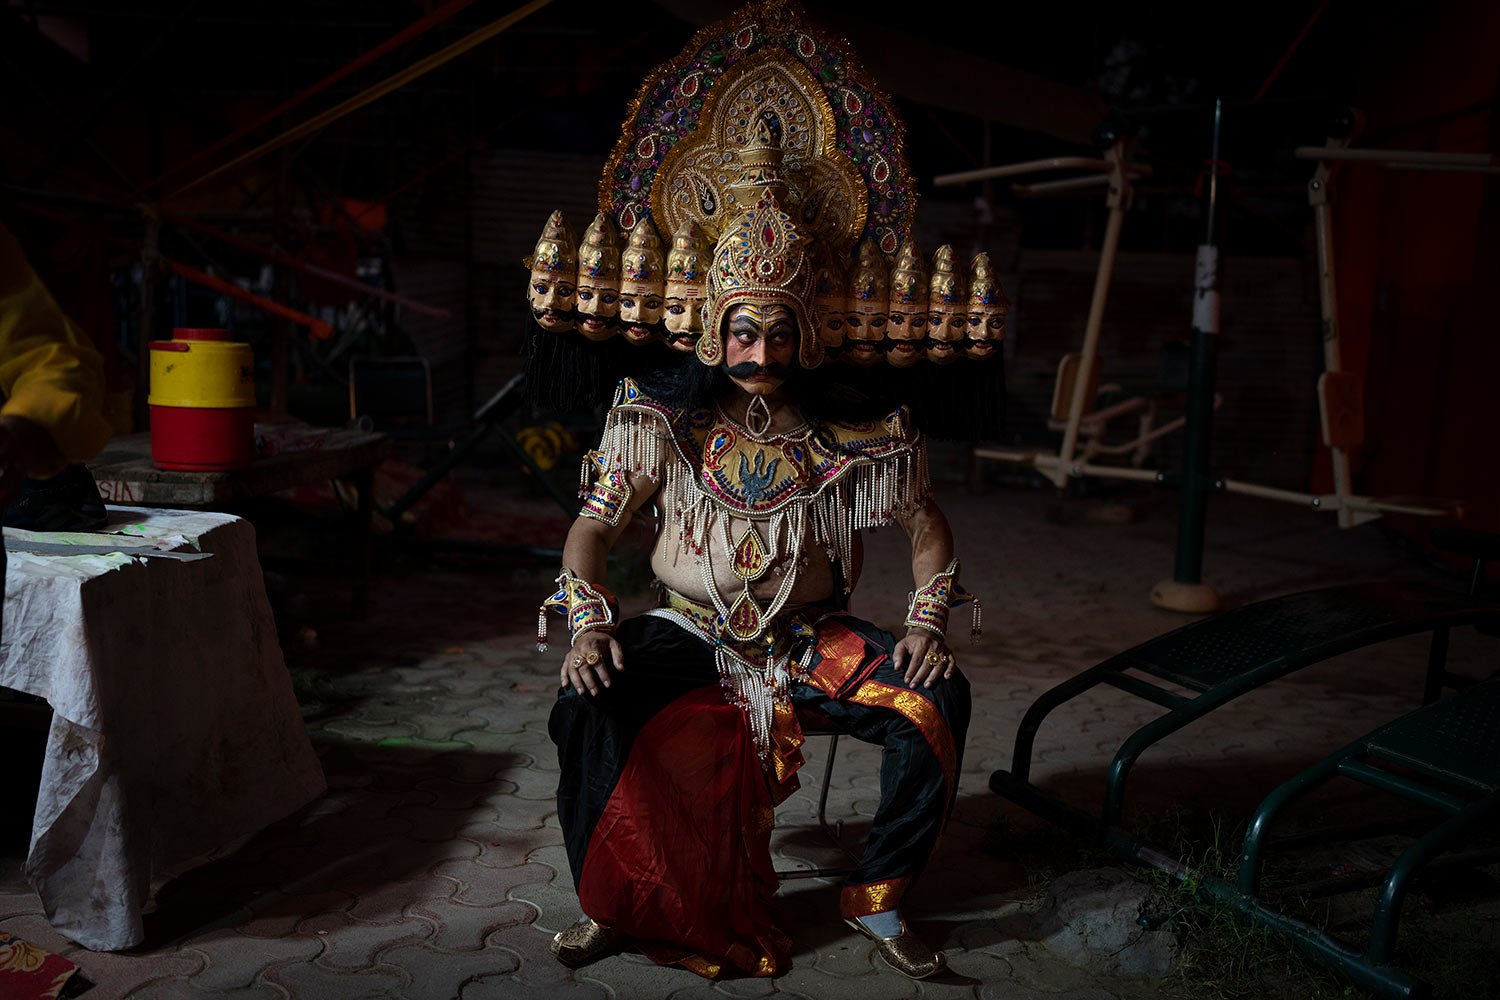  An artist dressed as demon king Ravana sits backstage before the final performance during a traditional Ramleela drama to celebrate the festival of Dussehra in New Delhi, India, Wednesday, Oct. 5, 2022.  (AP Photo/Altaf Qadri) 